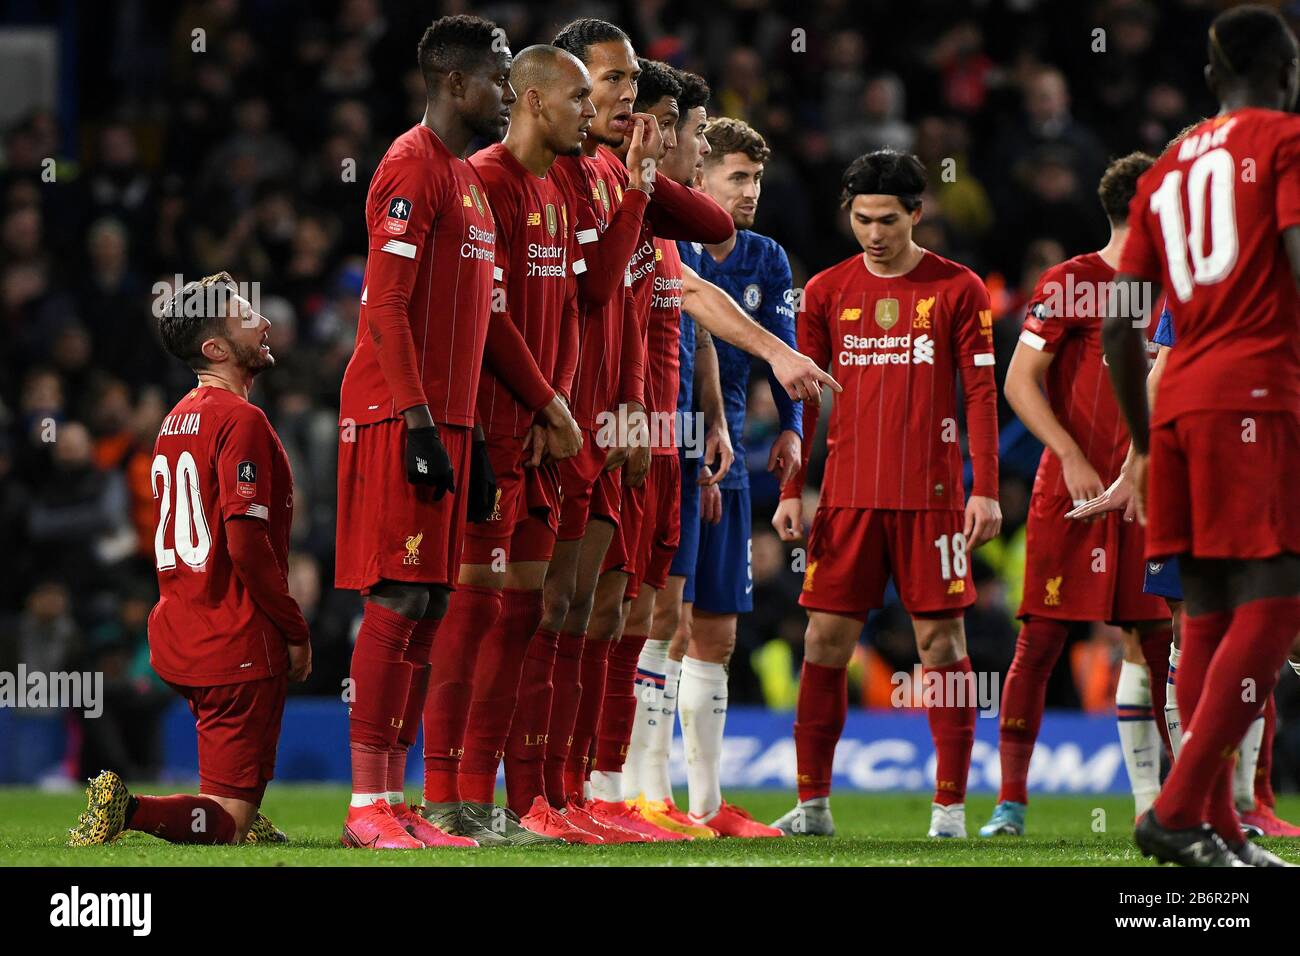 Adam Lallana Of Liverpool Keels Behind His Teams Wall To Defend A Free Kick Chelsea V Liverpool The Emirates Fa Cup Fifth Round Stamford Bridge London Uk 3rd March